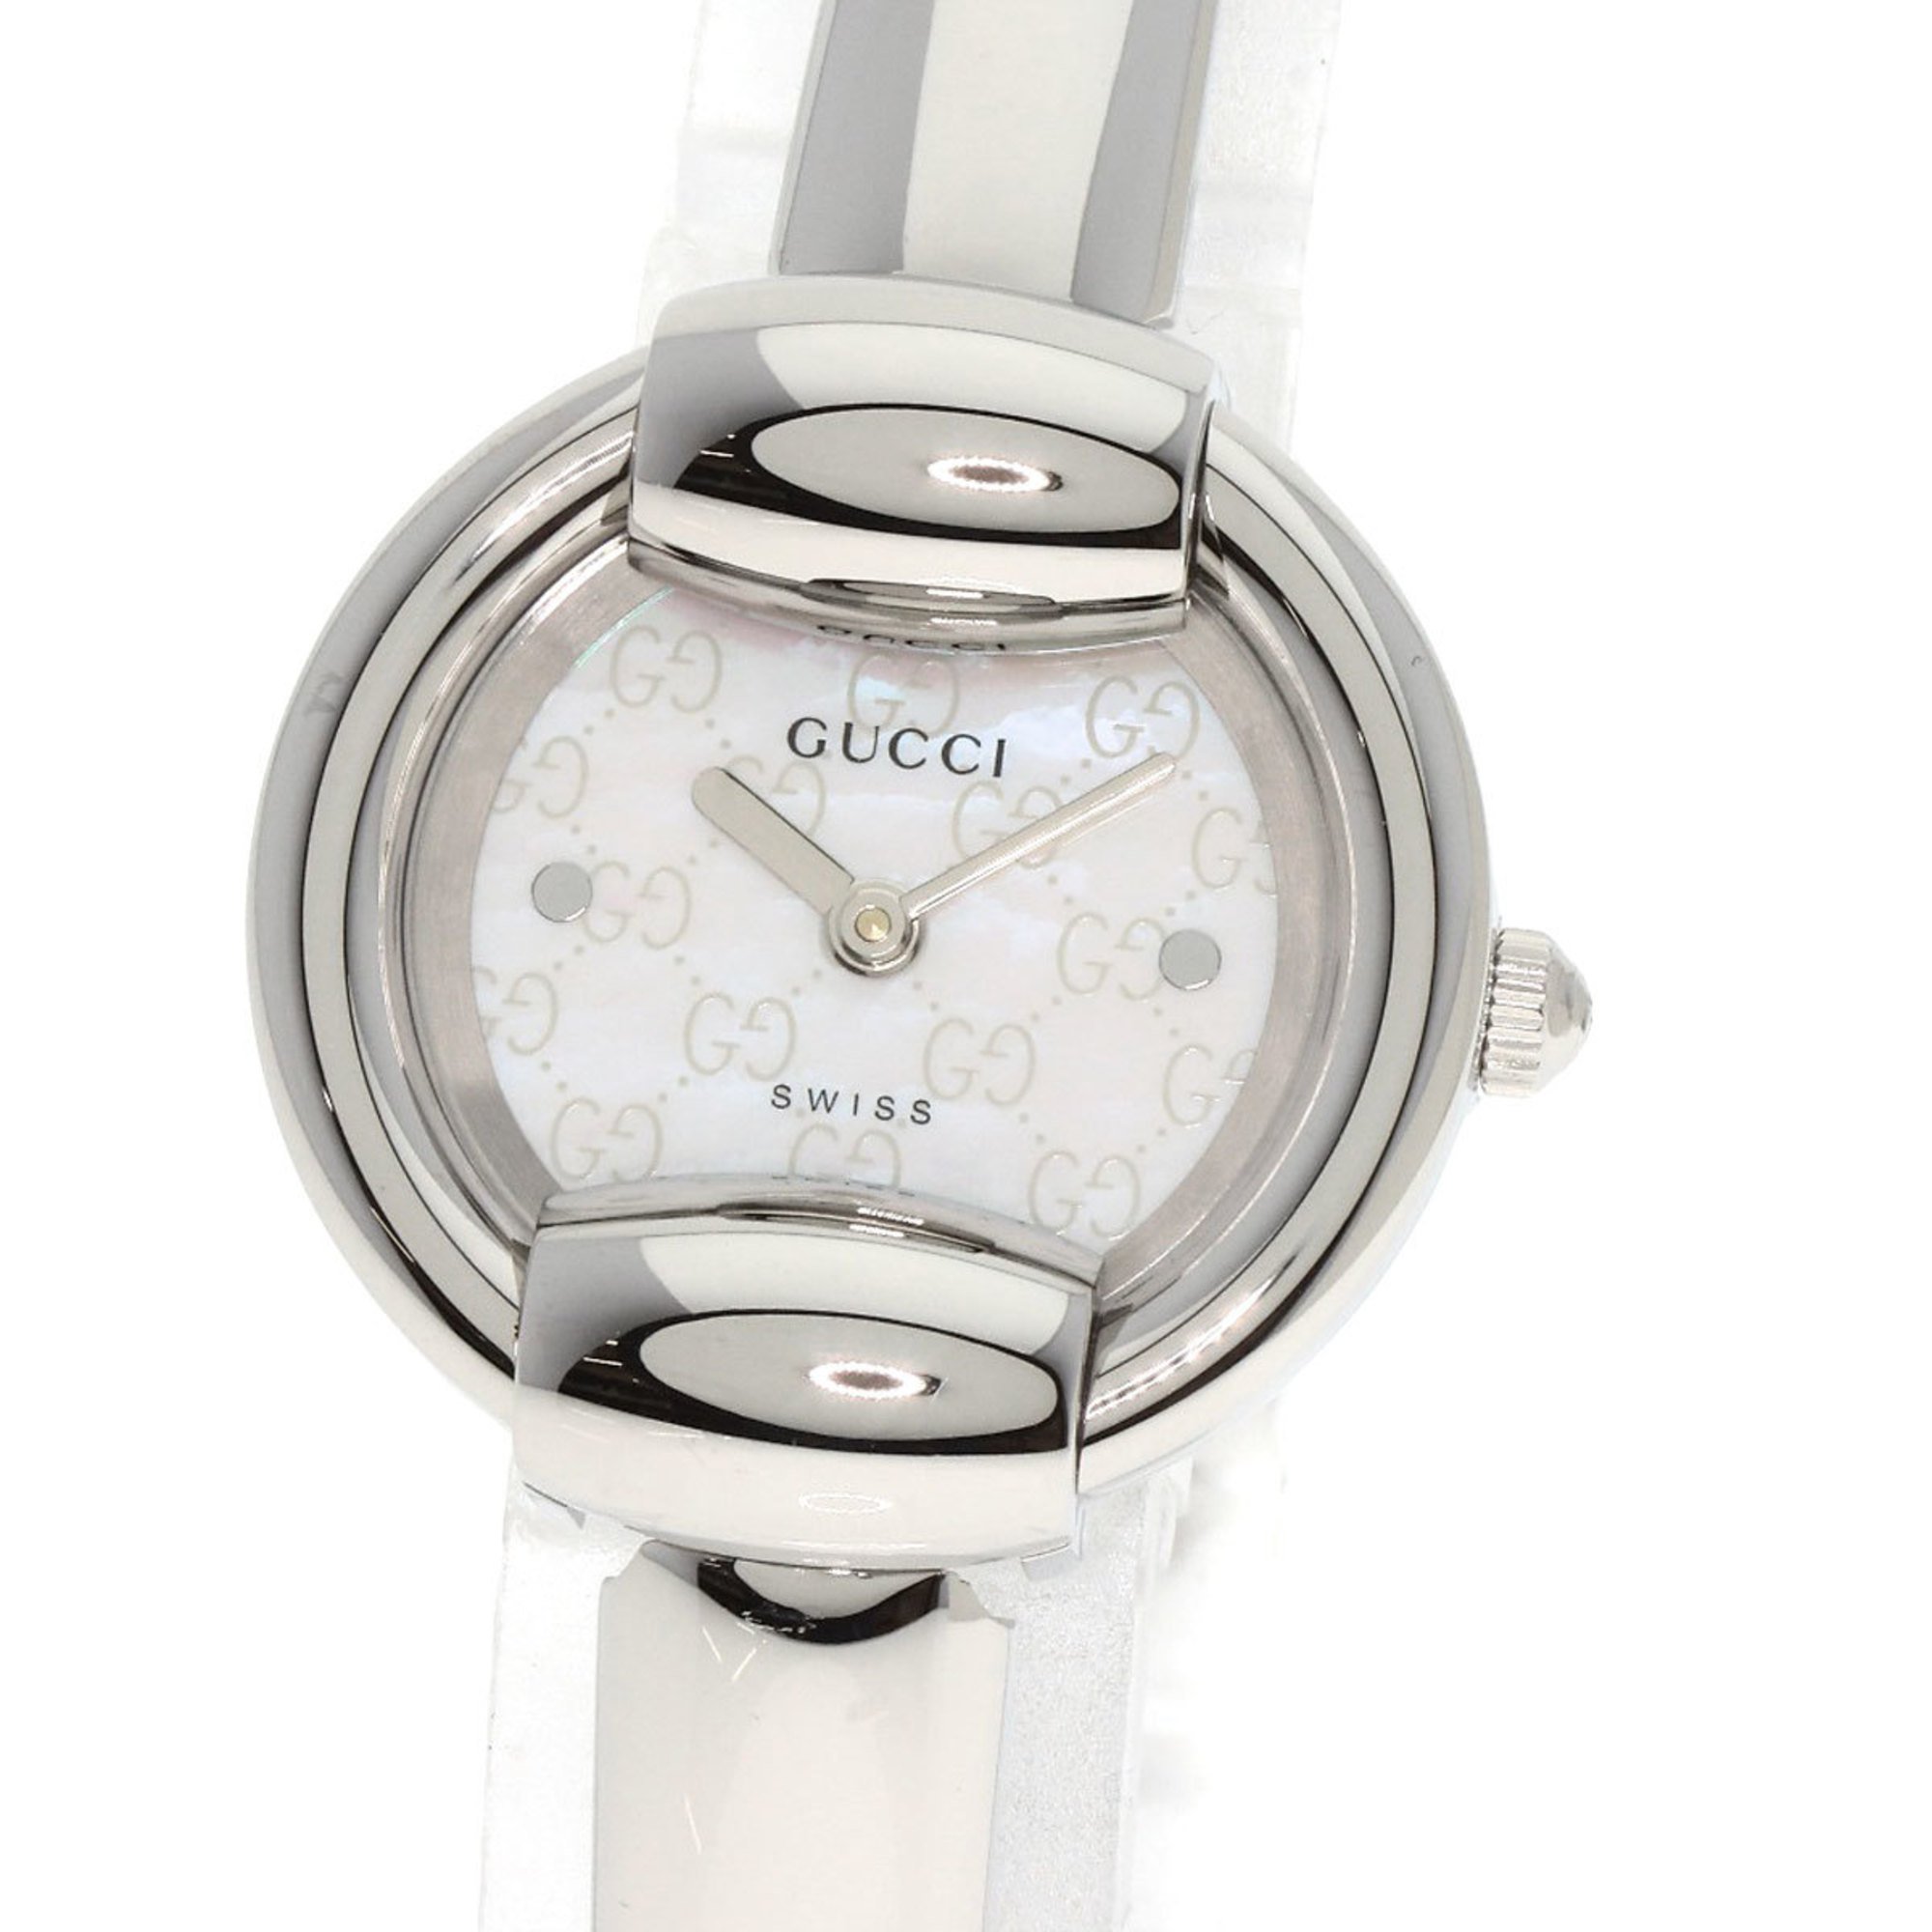 Gucci 1400L Round Face Bangle Watch Stainless Steel SS Ladies